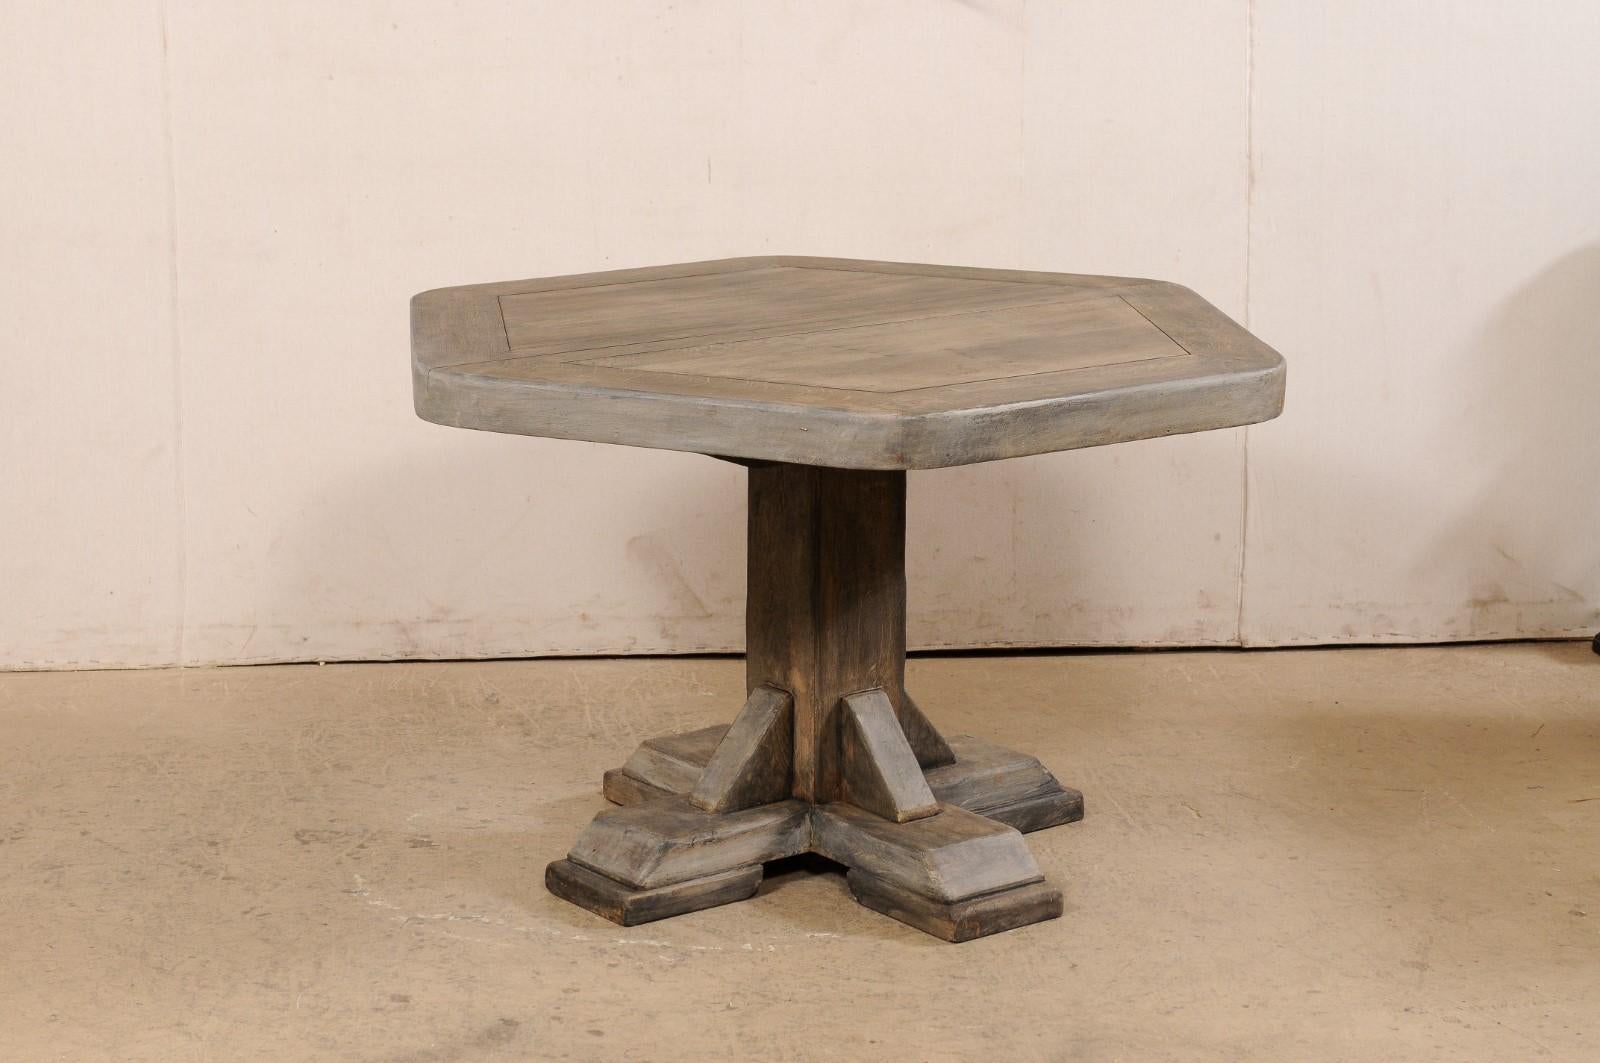 European Hexagon-Shaped Wooden Pedestal Table, Mid 20th century For Sale 4